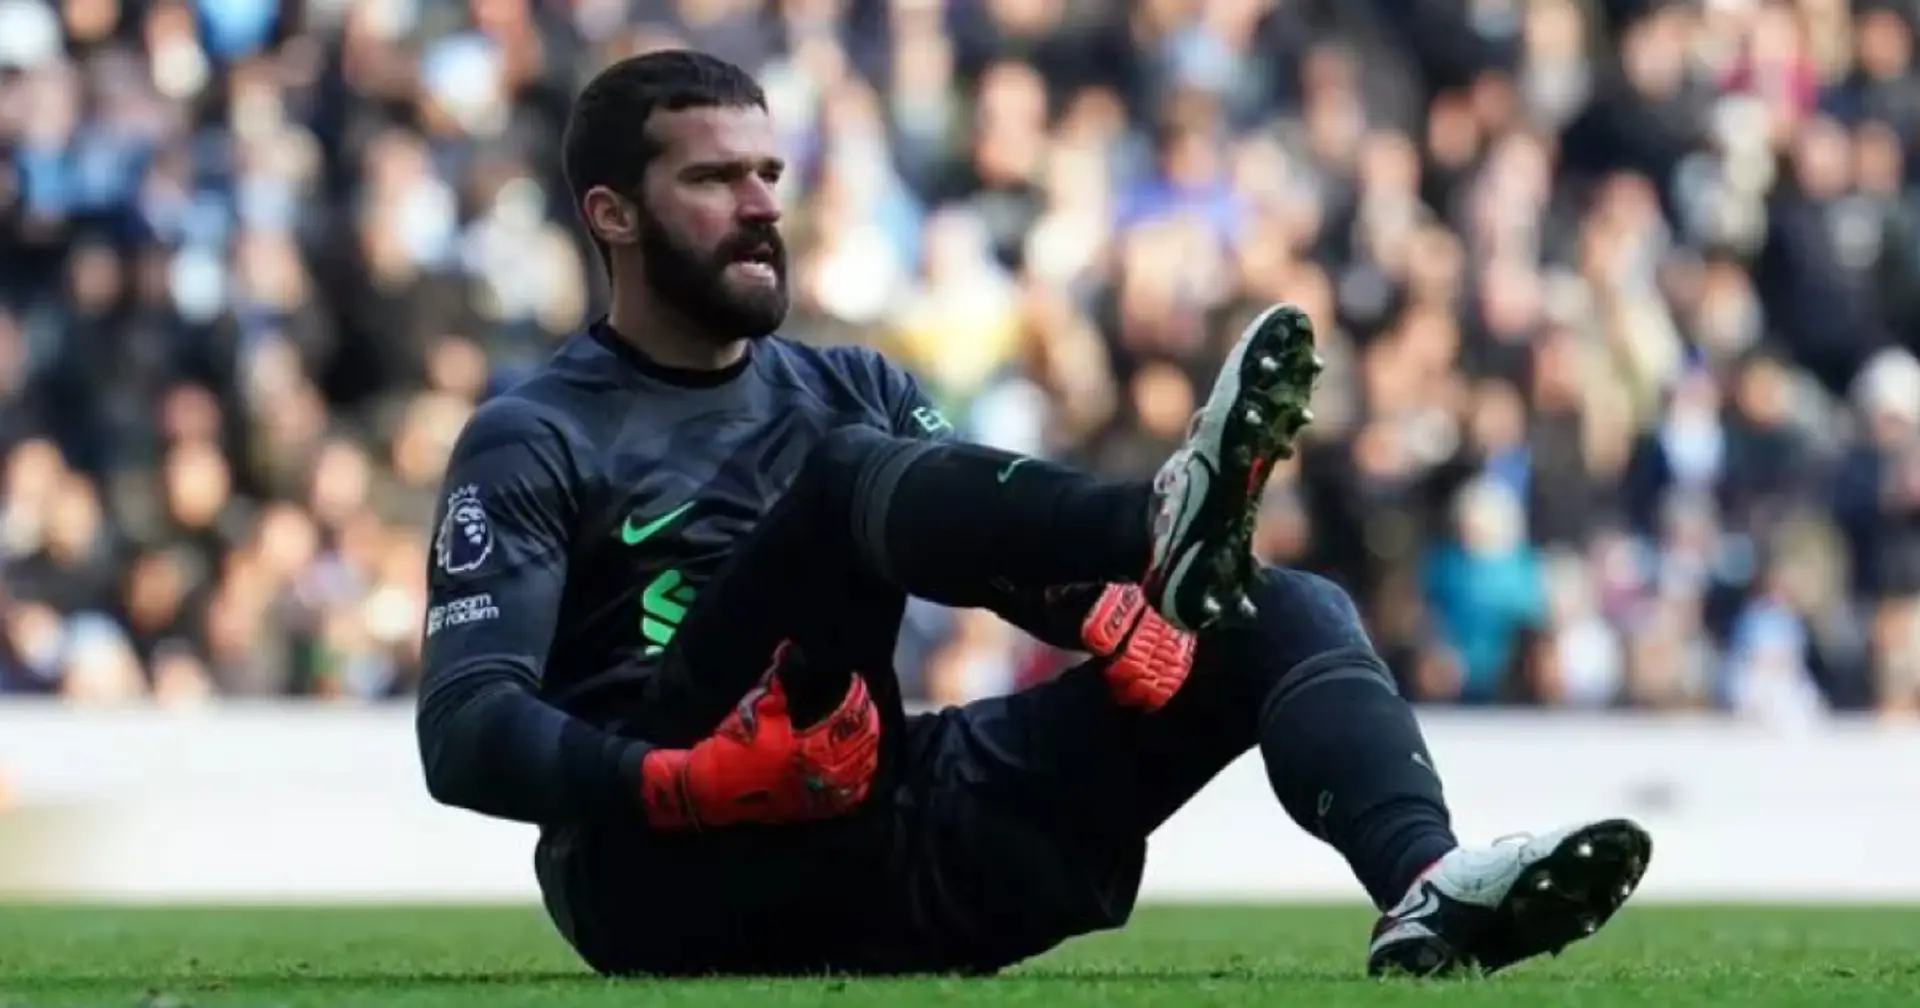 Alisson slammed after Man City game & 2 more big stories you might've missed